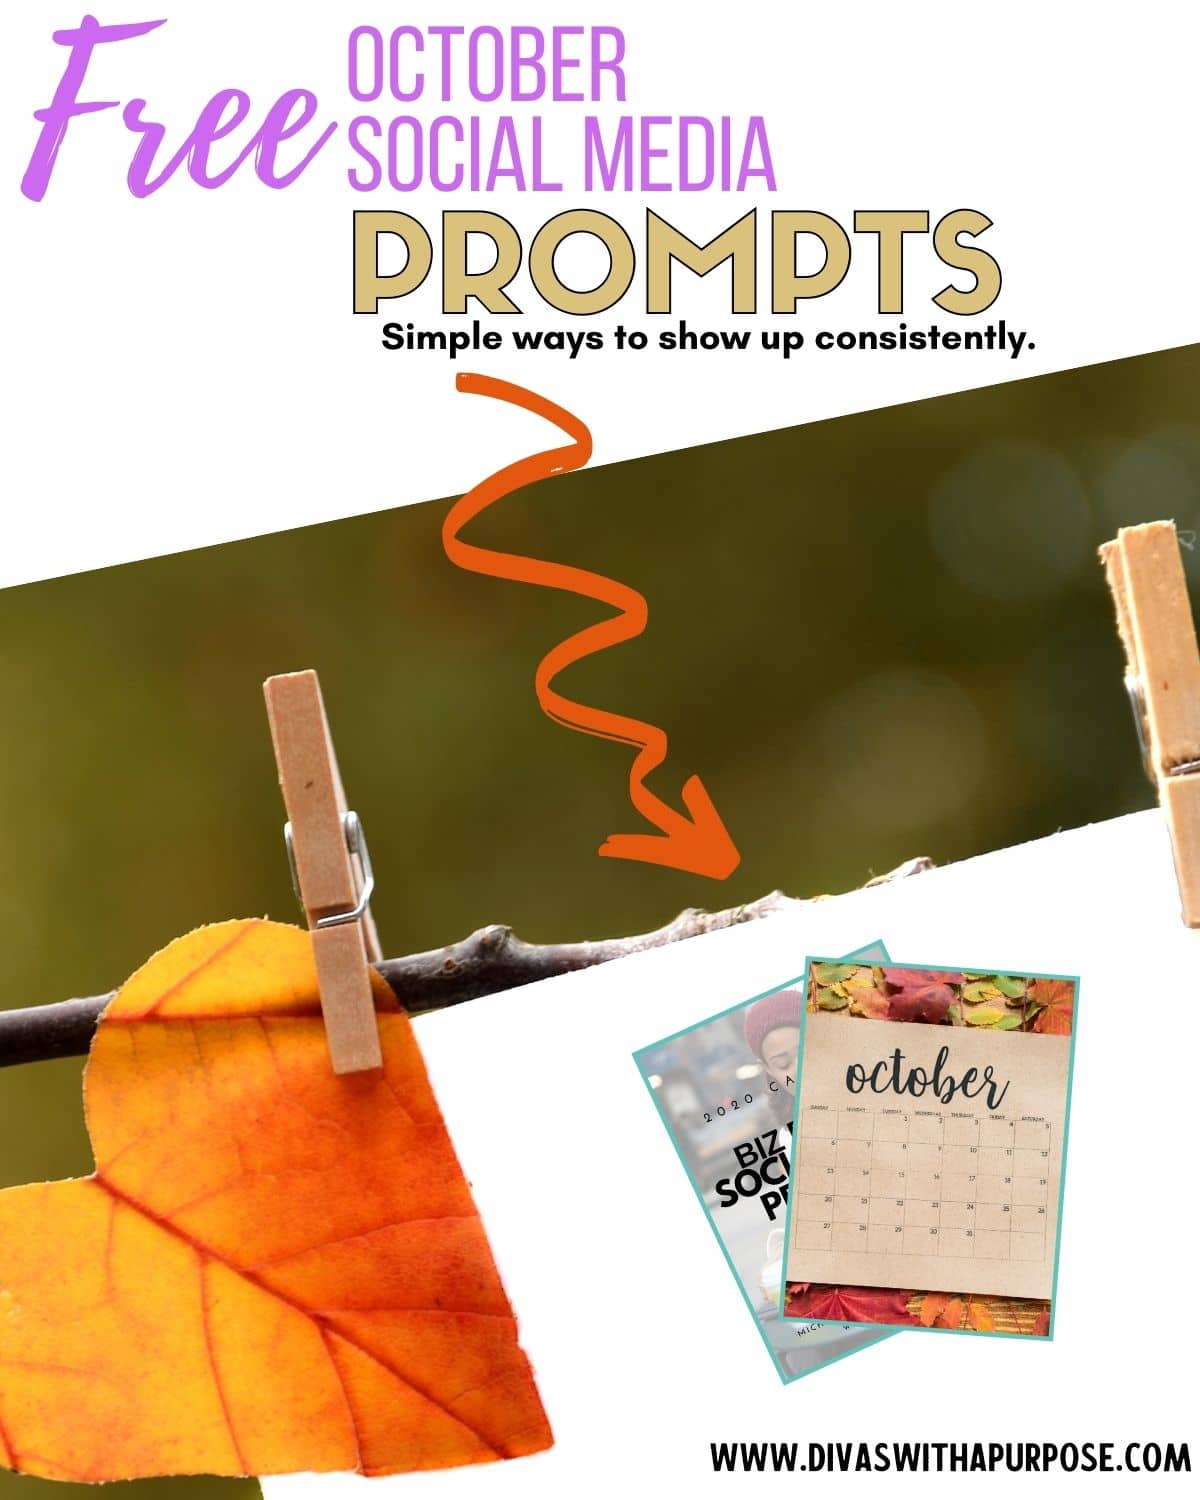 Here are October Social Media Prompts to help you show up consistently and prepare your social media content calendar for the month.